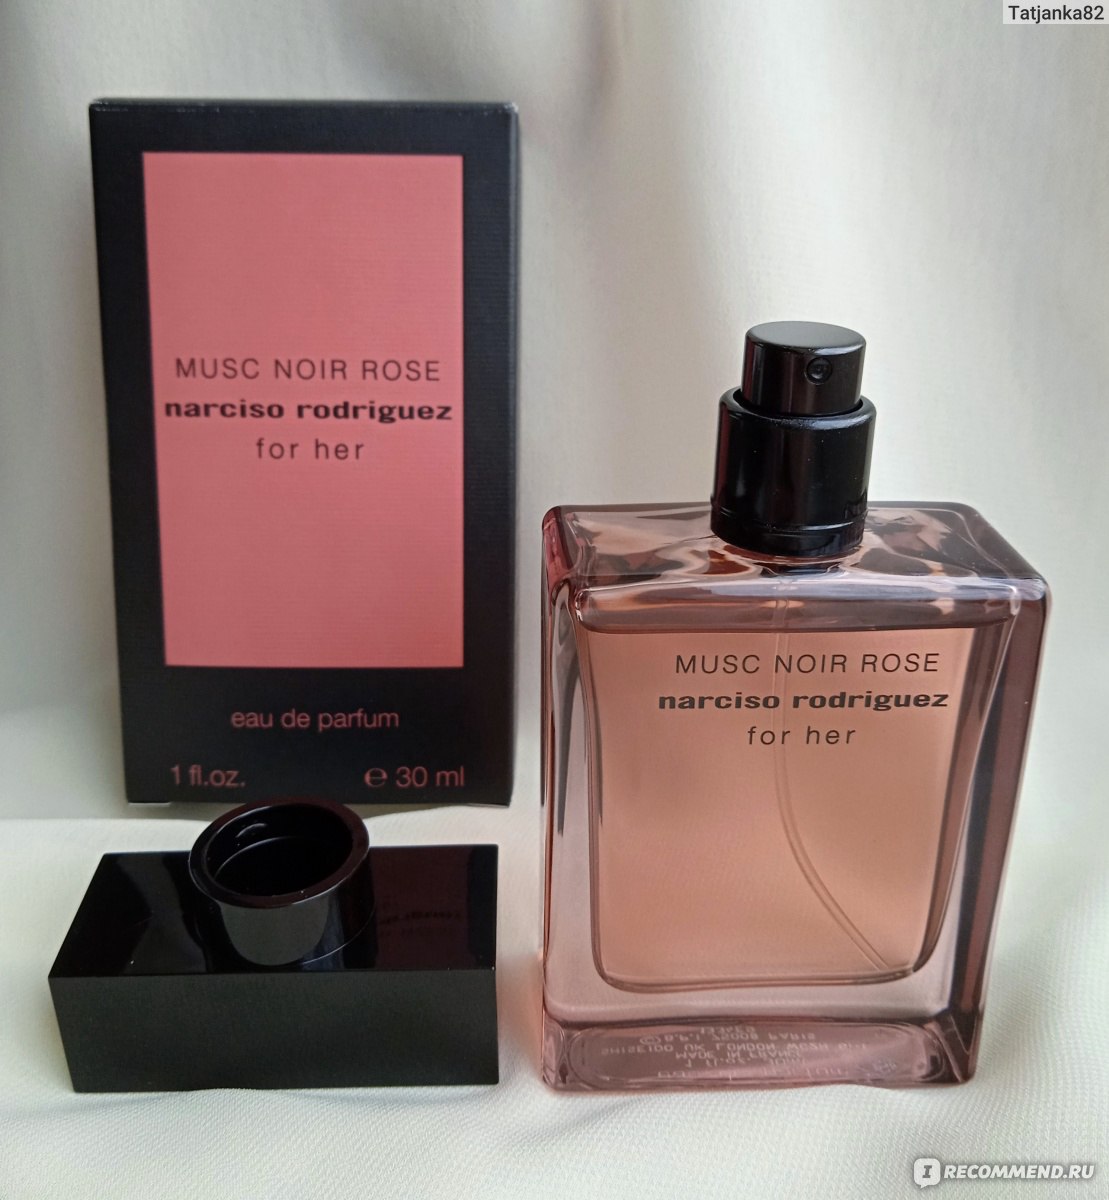 Narciso rodriguez musc noir rose. Narciso Rodriguez Musc Noir Rose for her. Narciso Rodriguez Noir Rose. Narciso Rodriguez Musc Noir Rose for her EDP 100 ml.